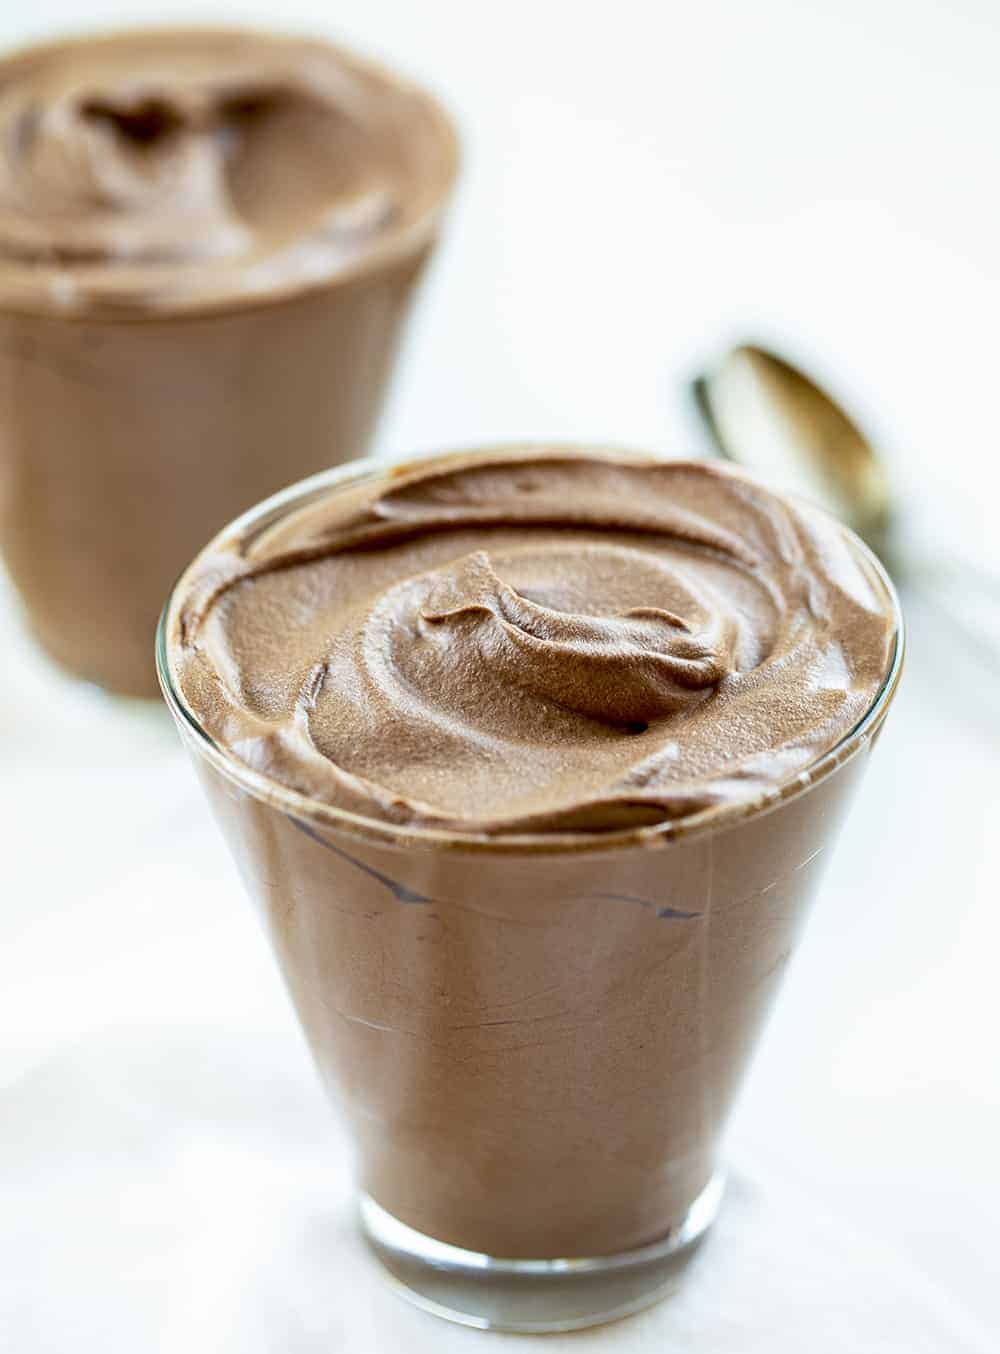 Easy Chocolate Mousse In Low Ball Glass with Smooth